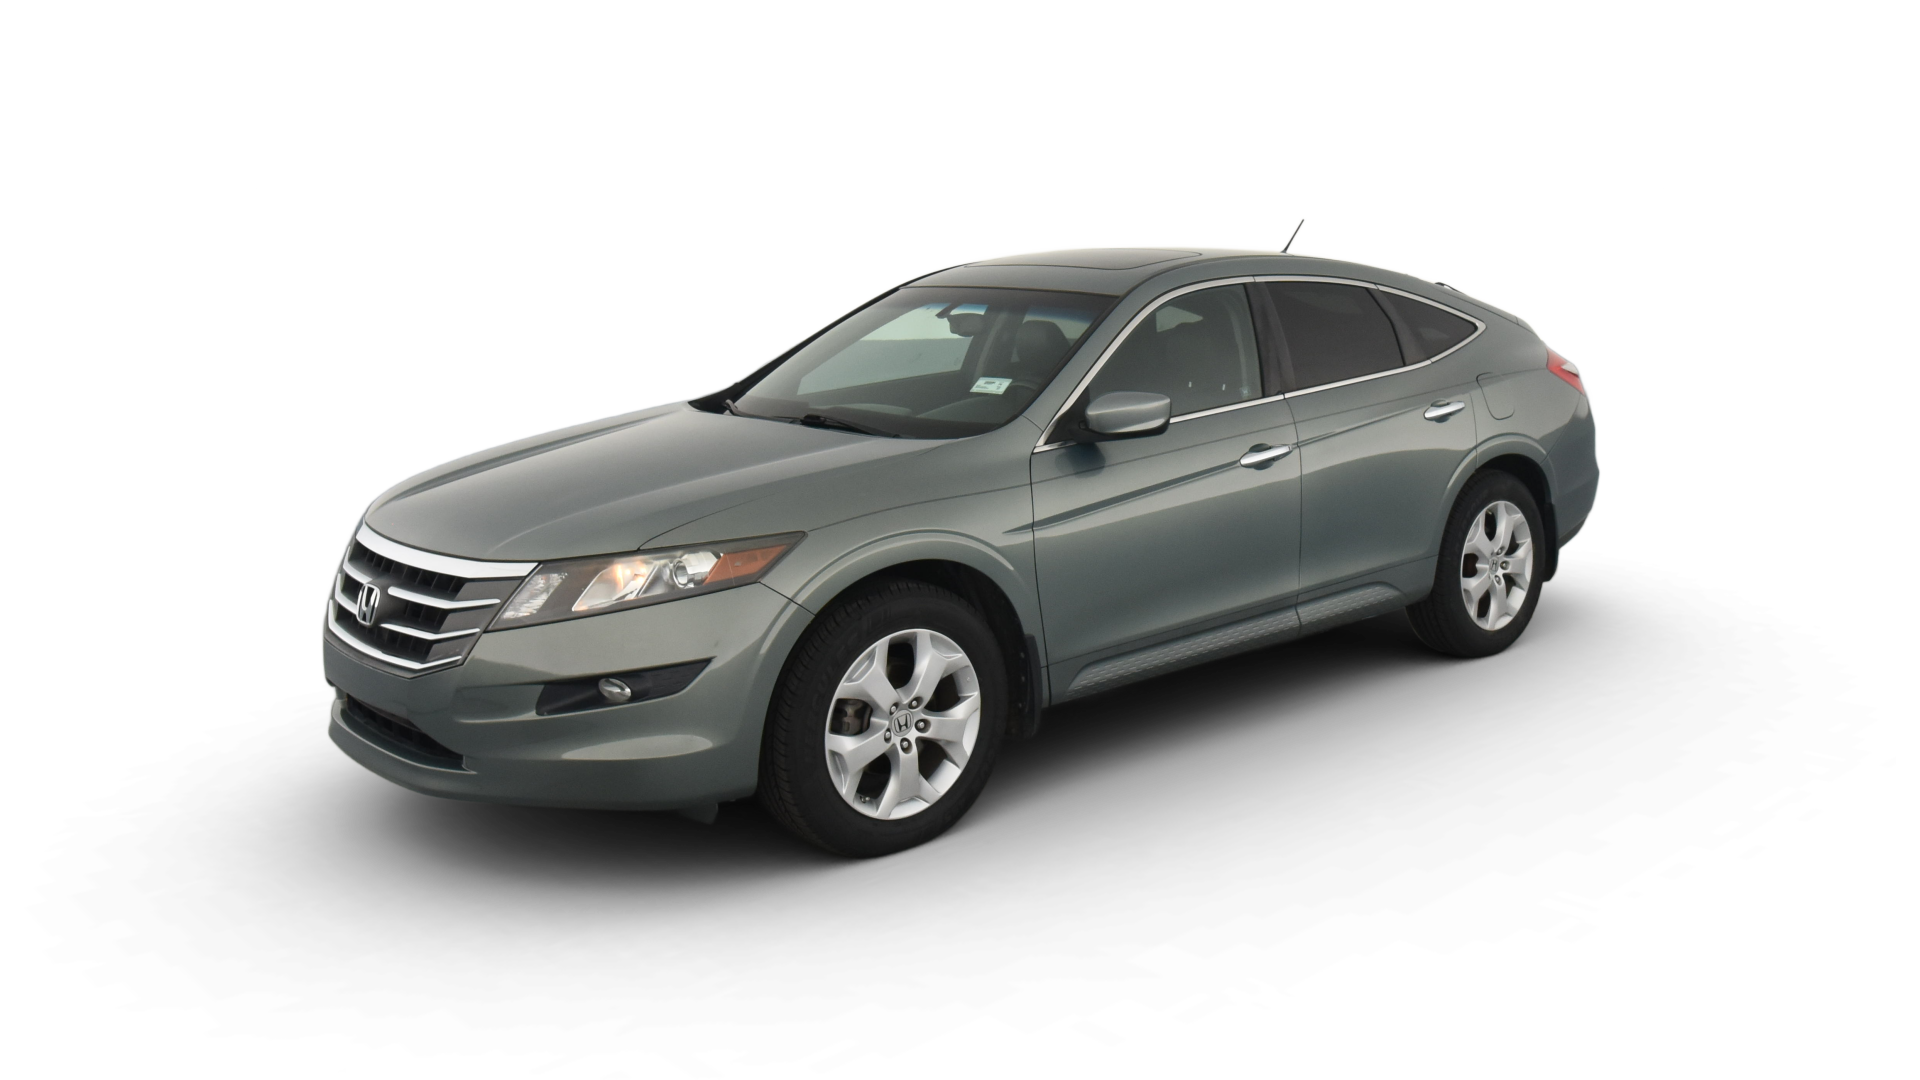 Used 2011 Honda Accord Crosstour For Sale Online | Carvana